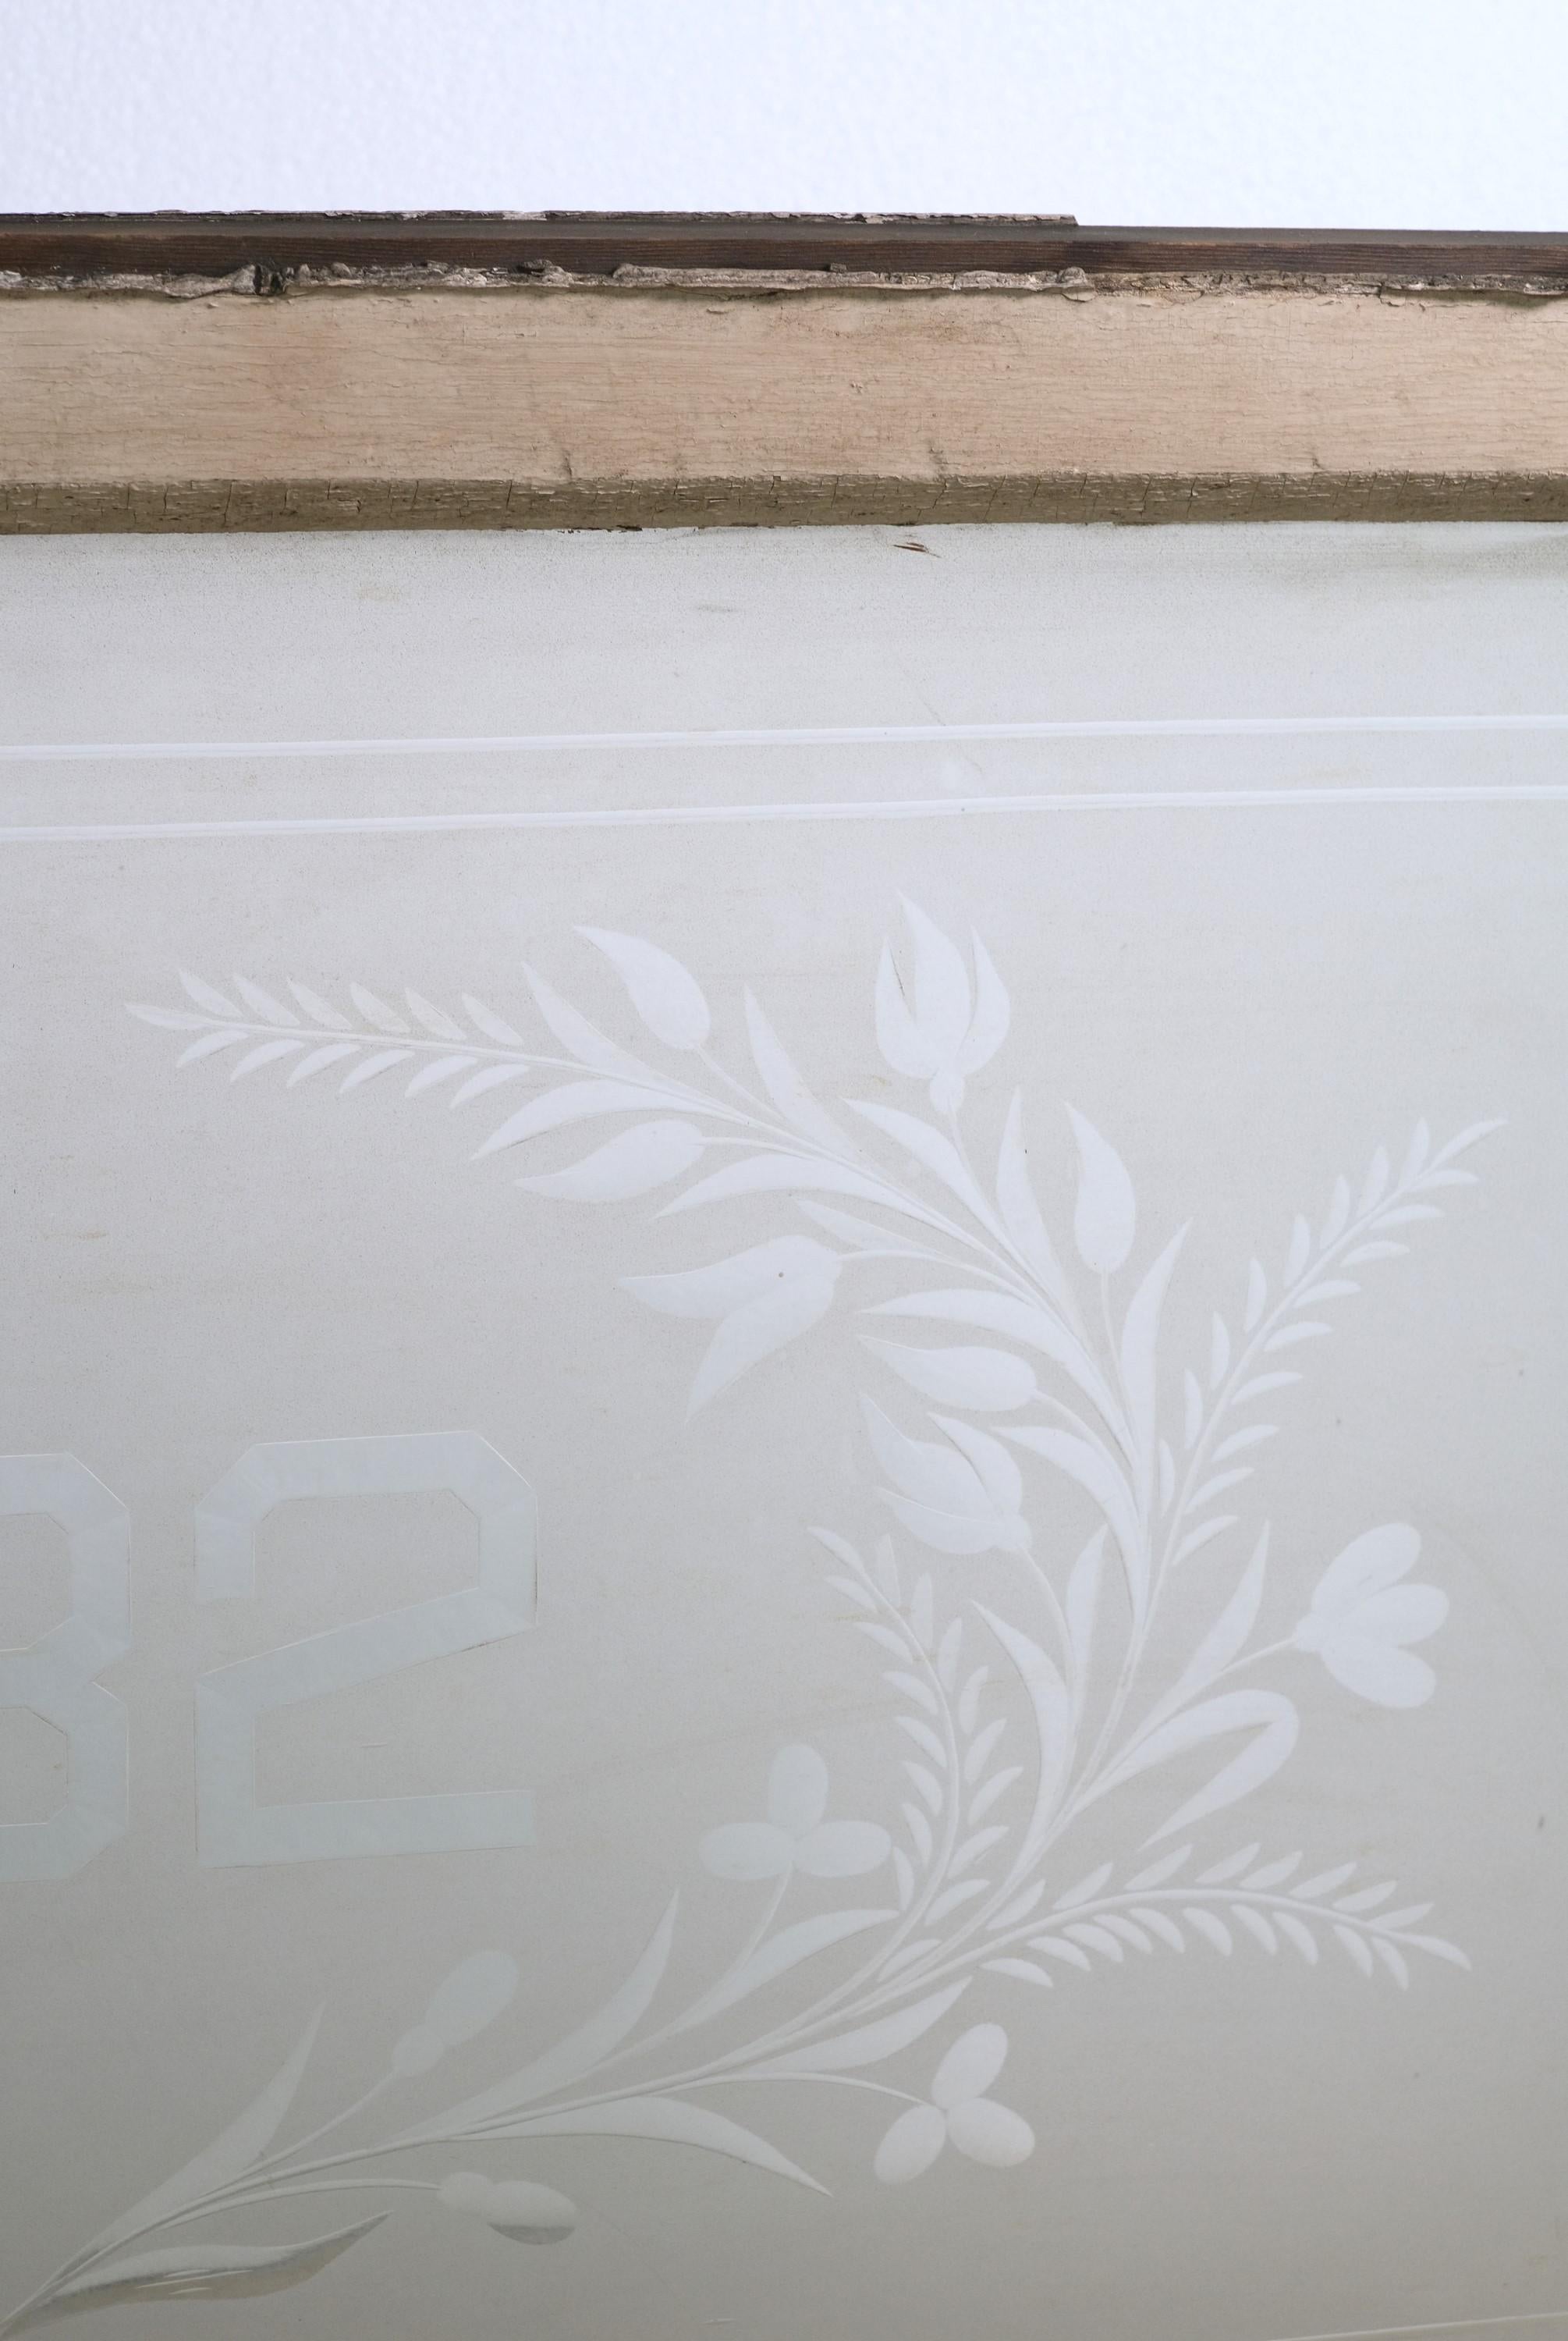 Antique frosted glass window transom with etched foliate details and house number 332 in the center. It has a pine frame which is painted an off white on one side and a brighter white on the opposite side. The glass is in very good condition, while